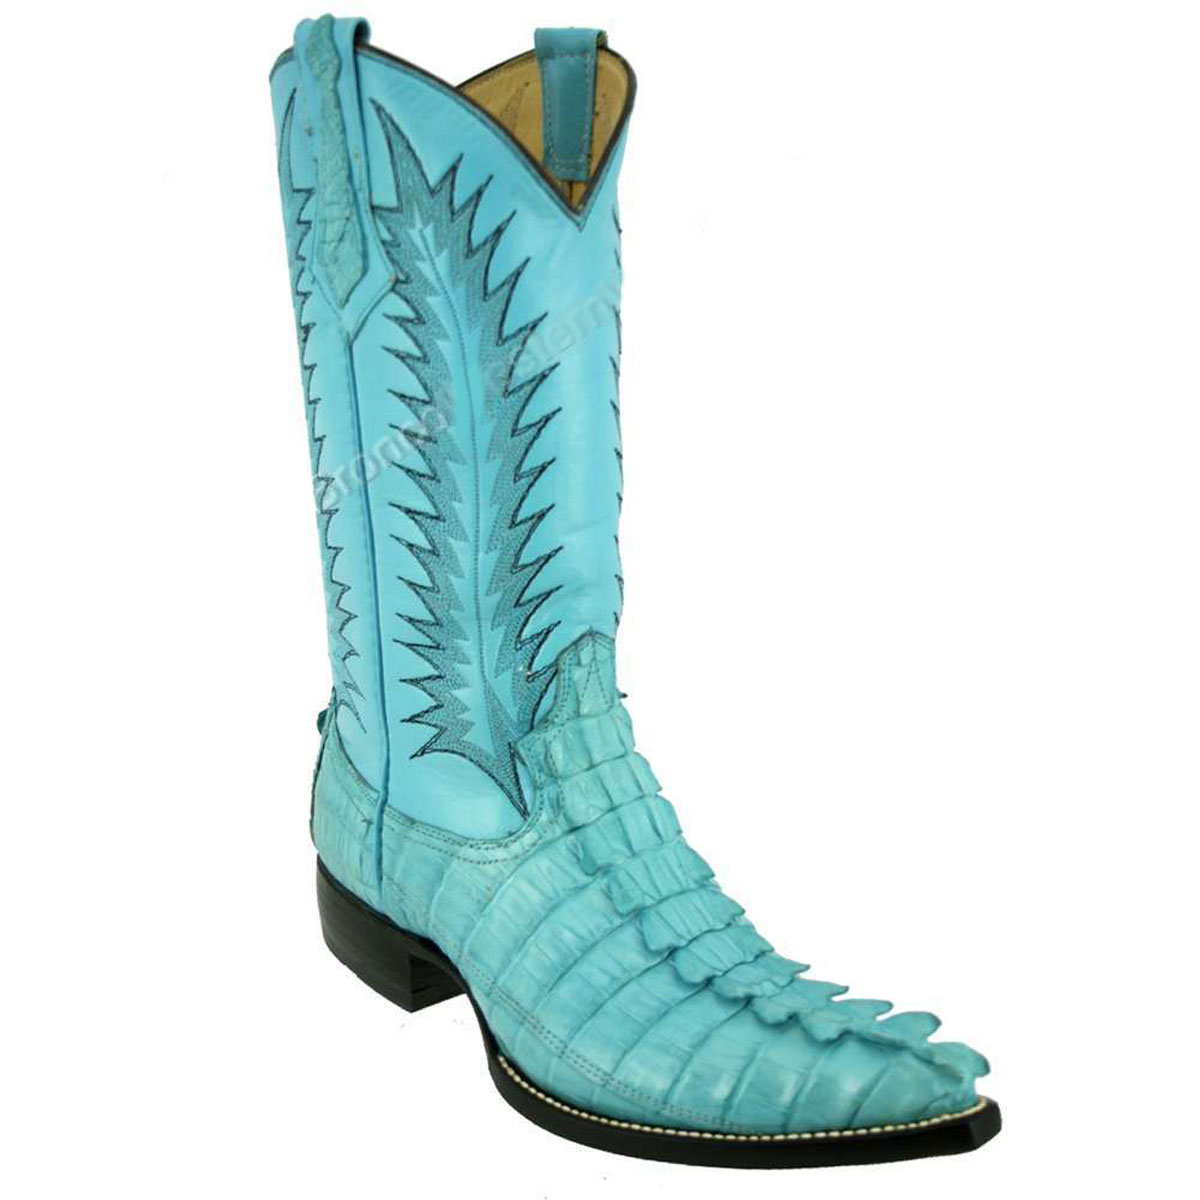 Sky Blue Full Quill Ostrich With Matching Belt – J&J Specialty Boot Co.